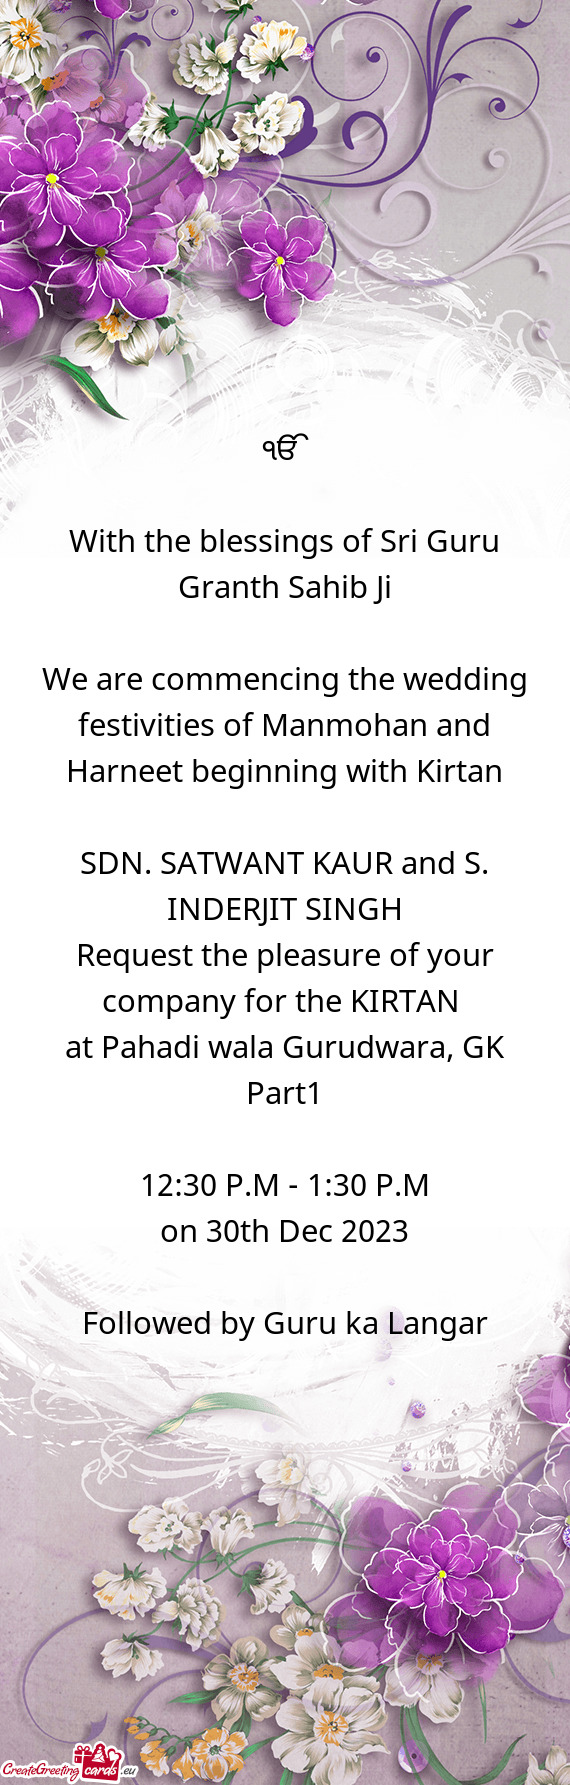 We are commencing the wedding festivities of Manmohan and Harneet beginning with Kirtan